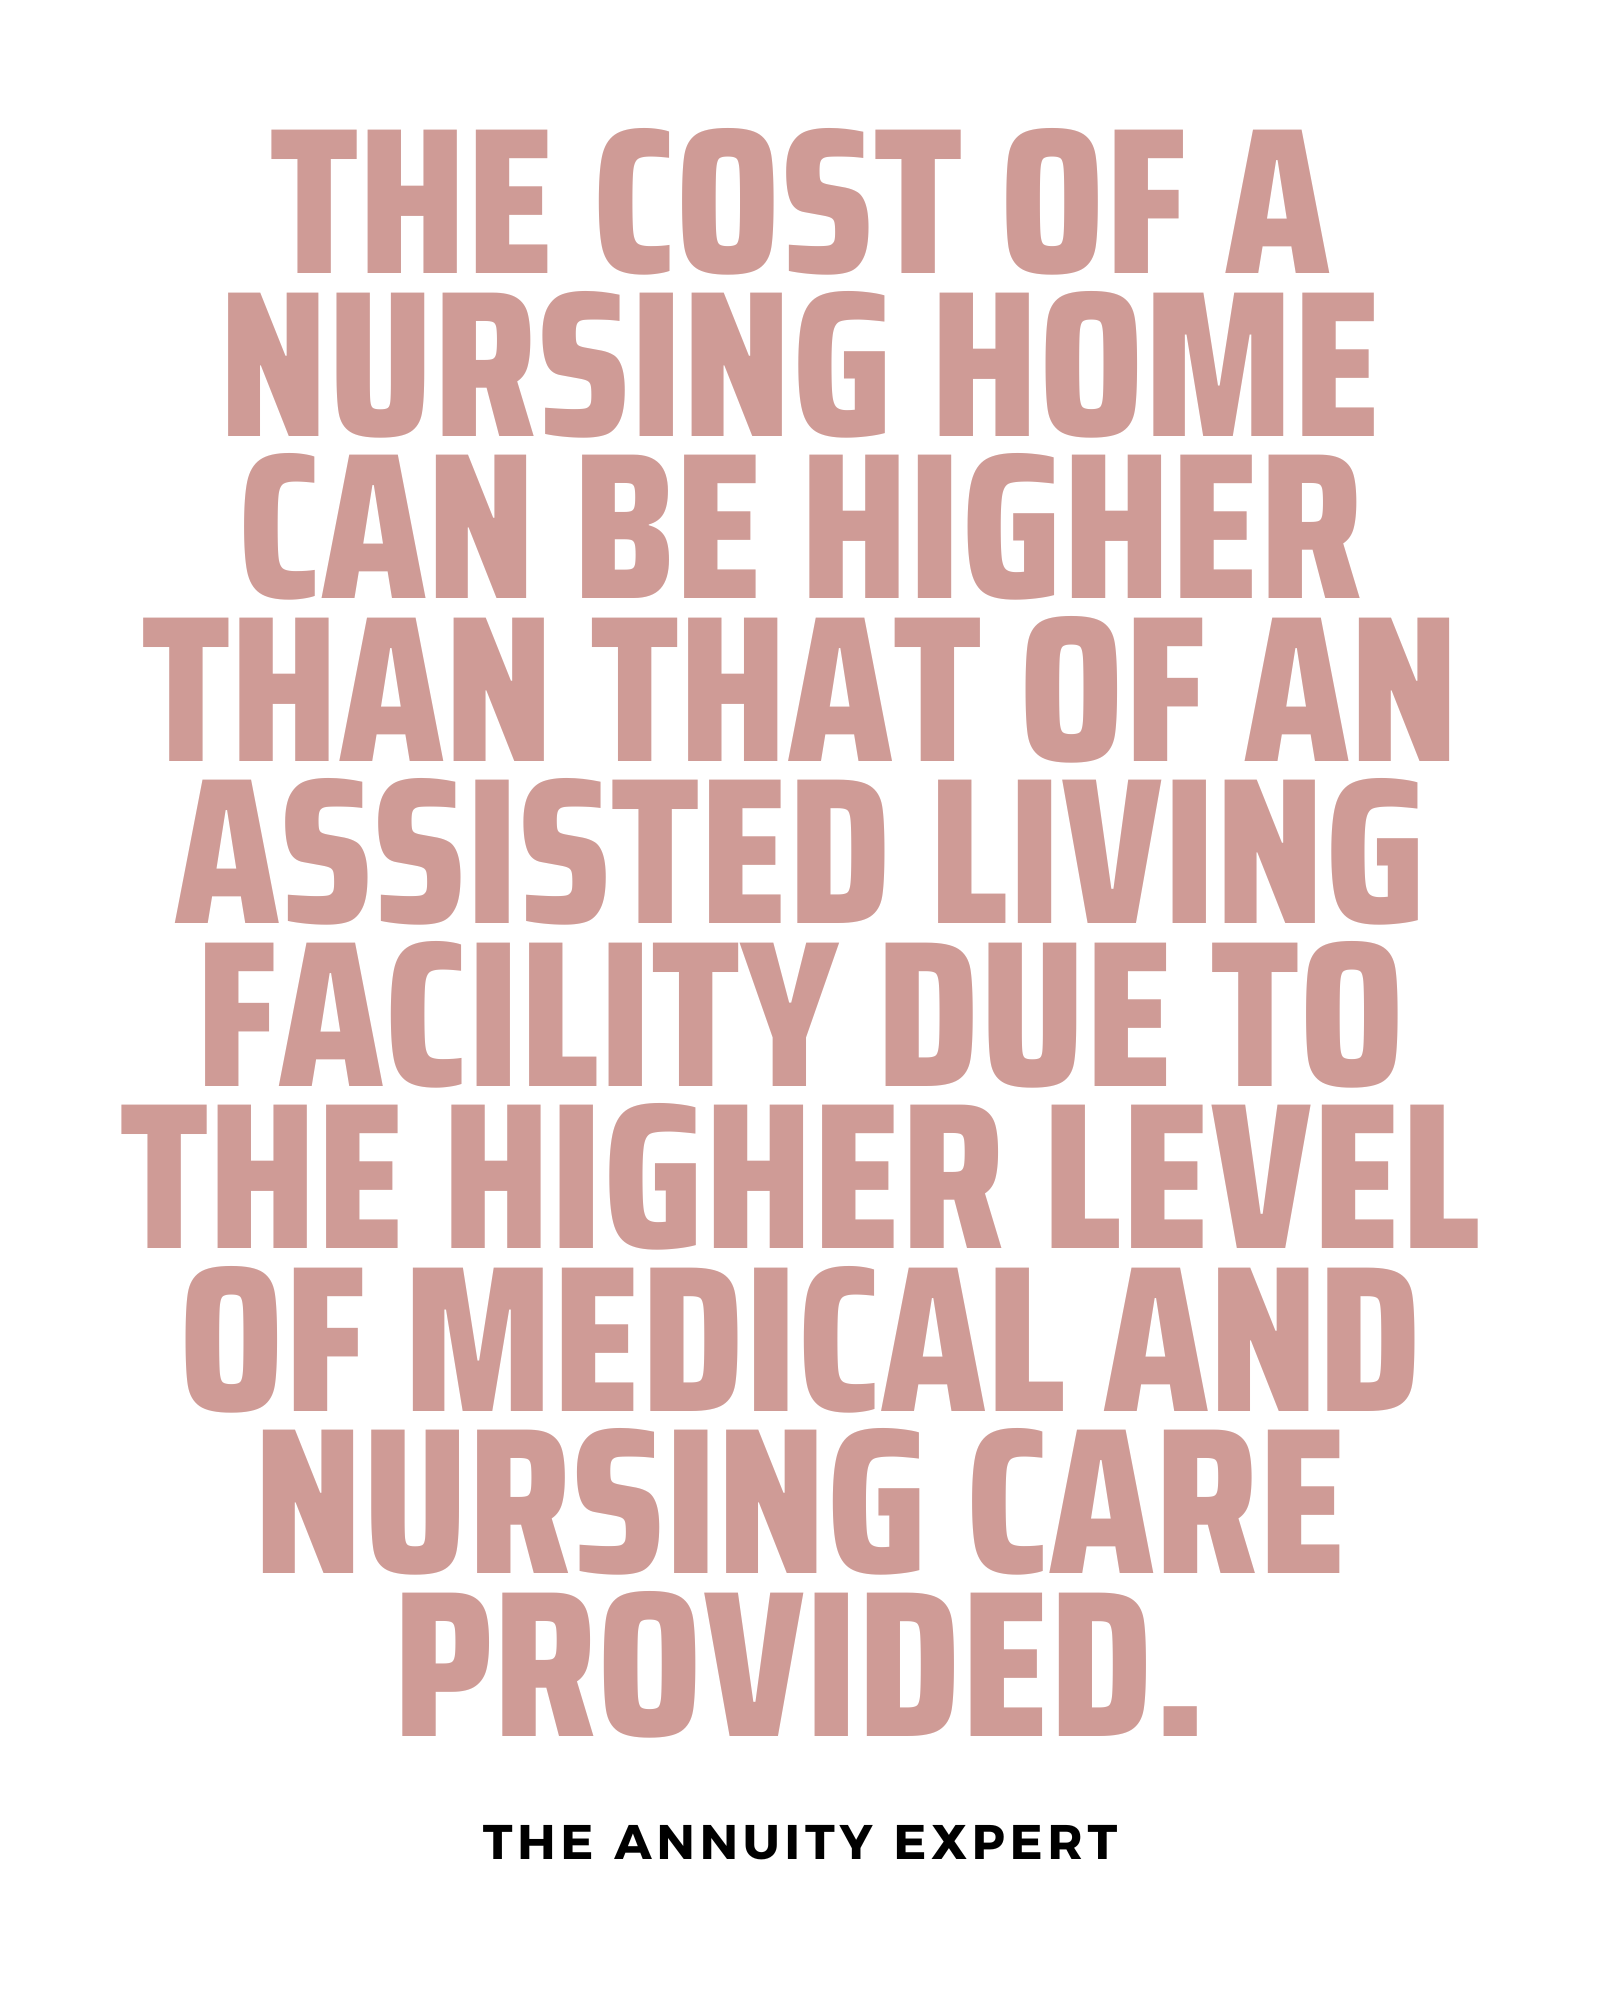 Nursing Home Costs Compared To Assisted Living